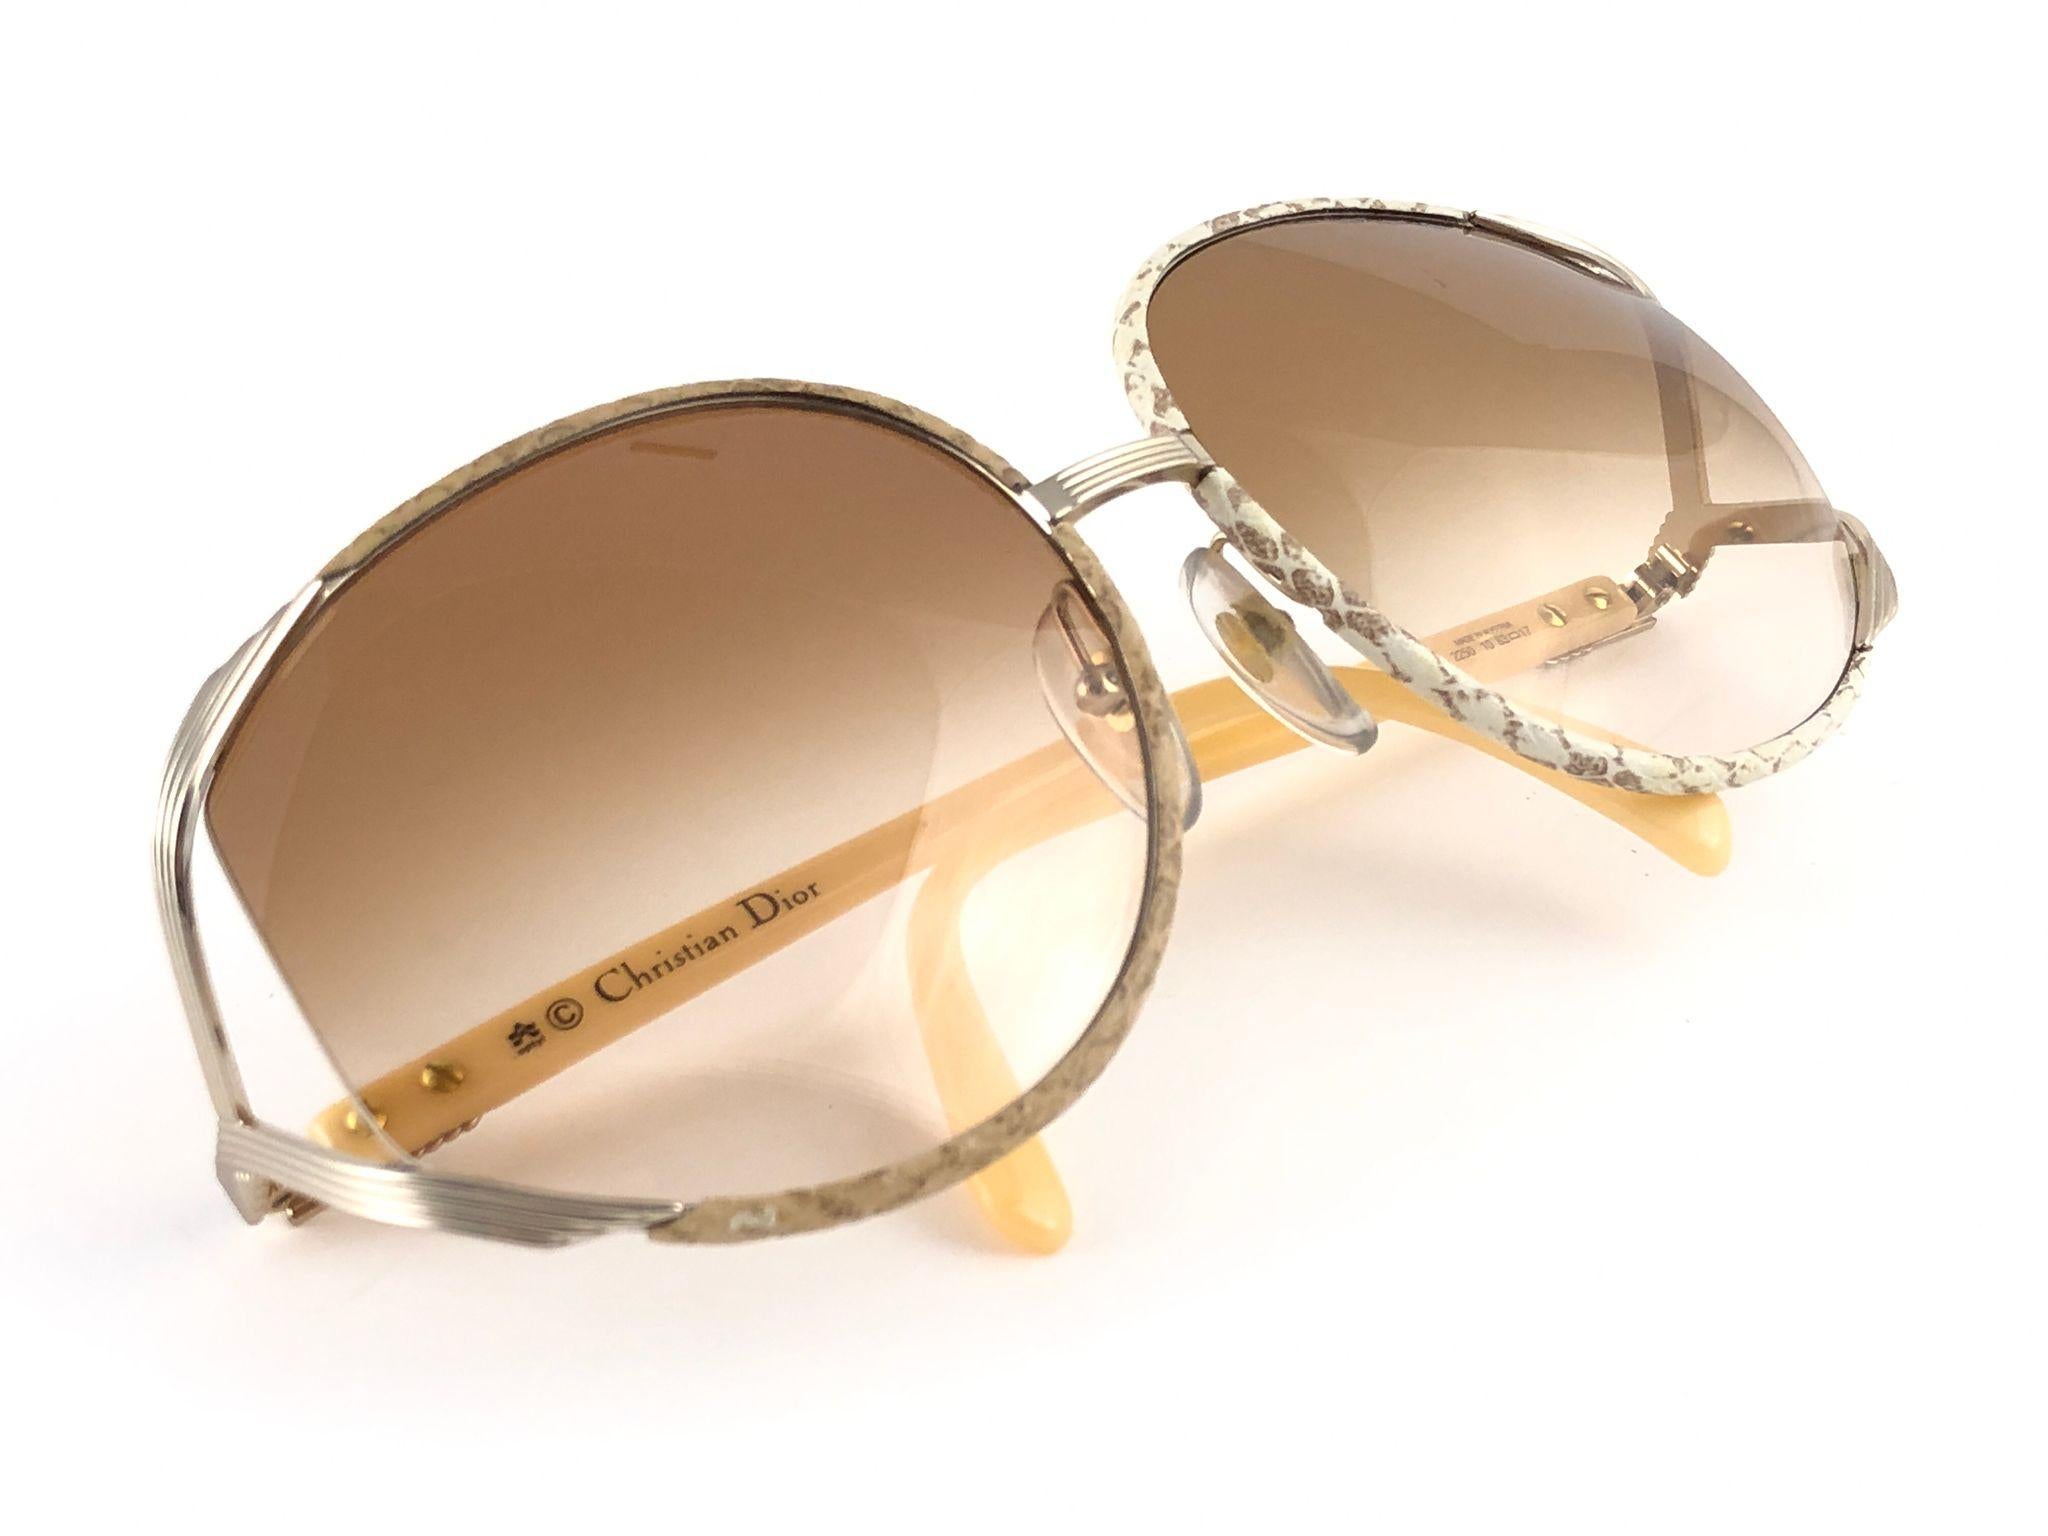 New Vintage Christian Dior 2250 Oversized Python Lined Sunglasses  For Sale 1